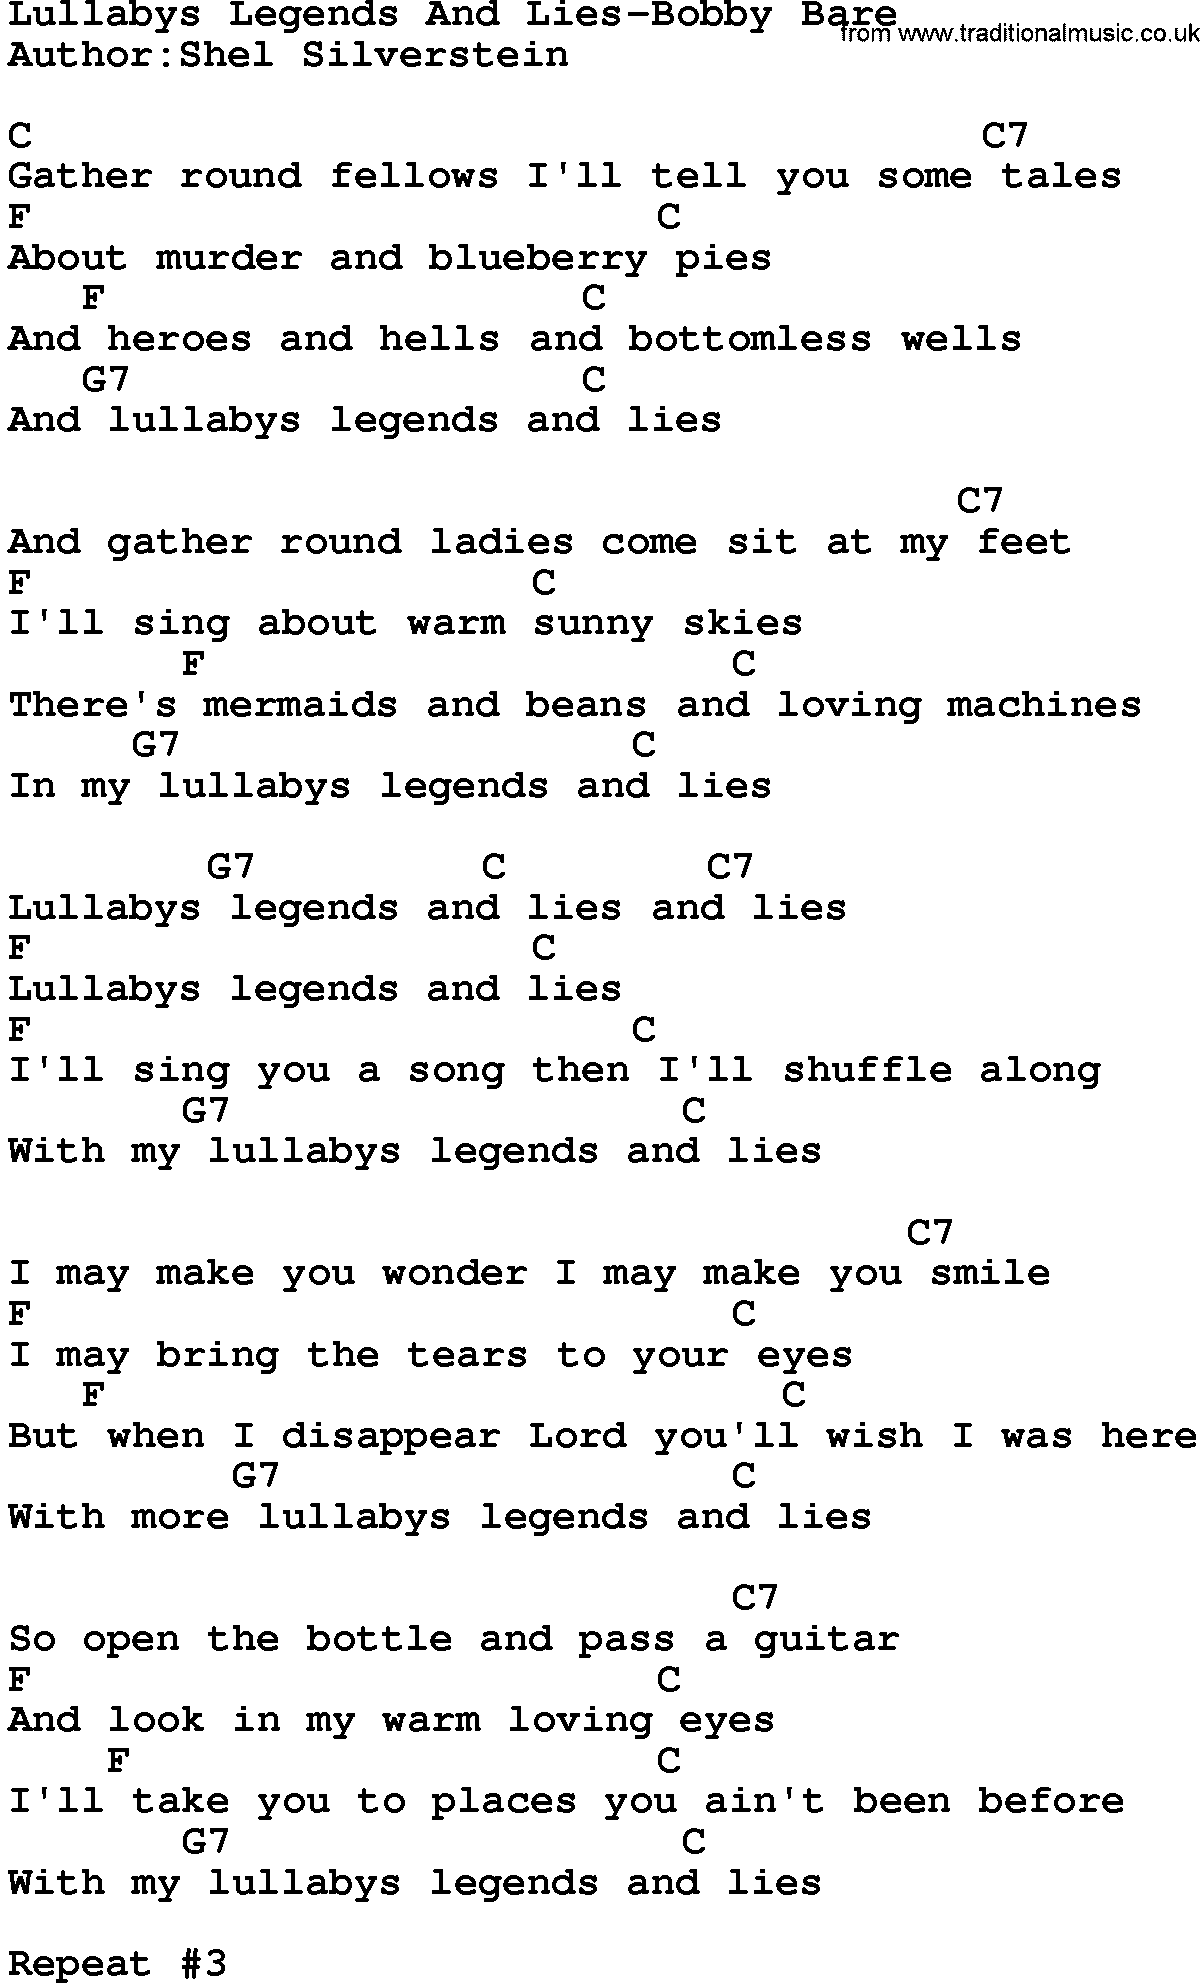 Country music song: Lullabys Legends And Lies-Bobby Bare  lyrics and chords